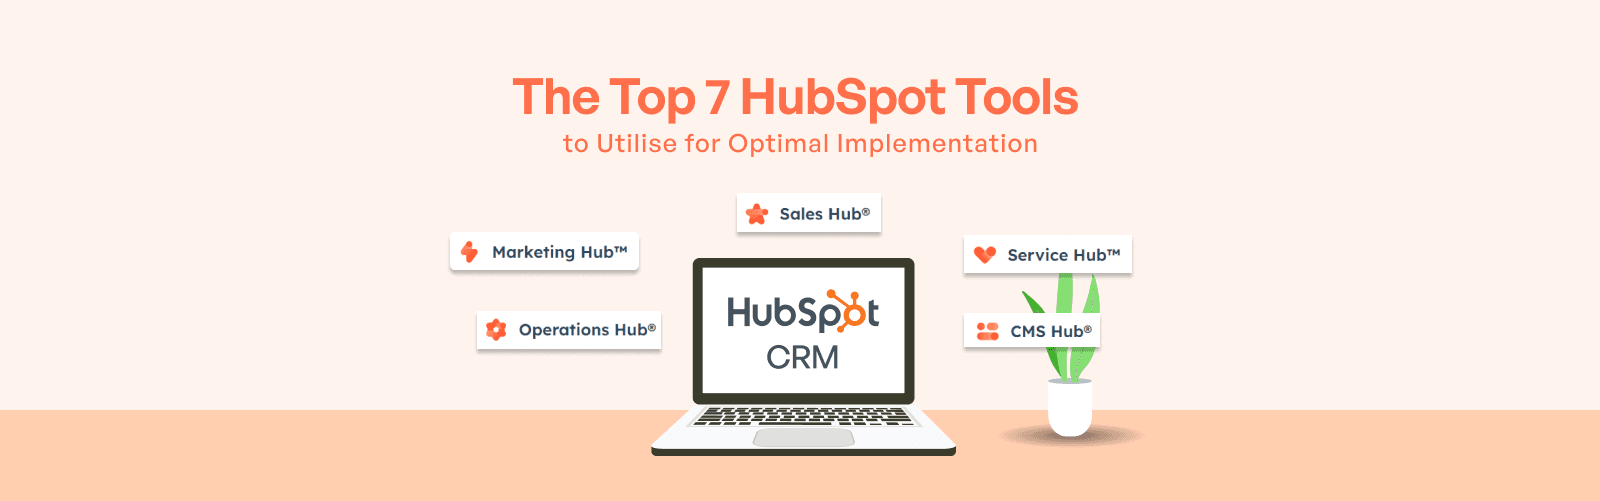 The Top 7 HubSpot Tools to Utilise for Optimal Implementation